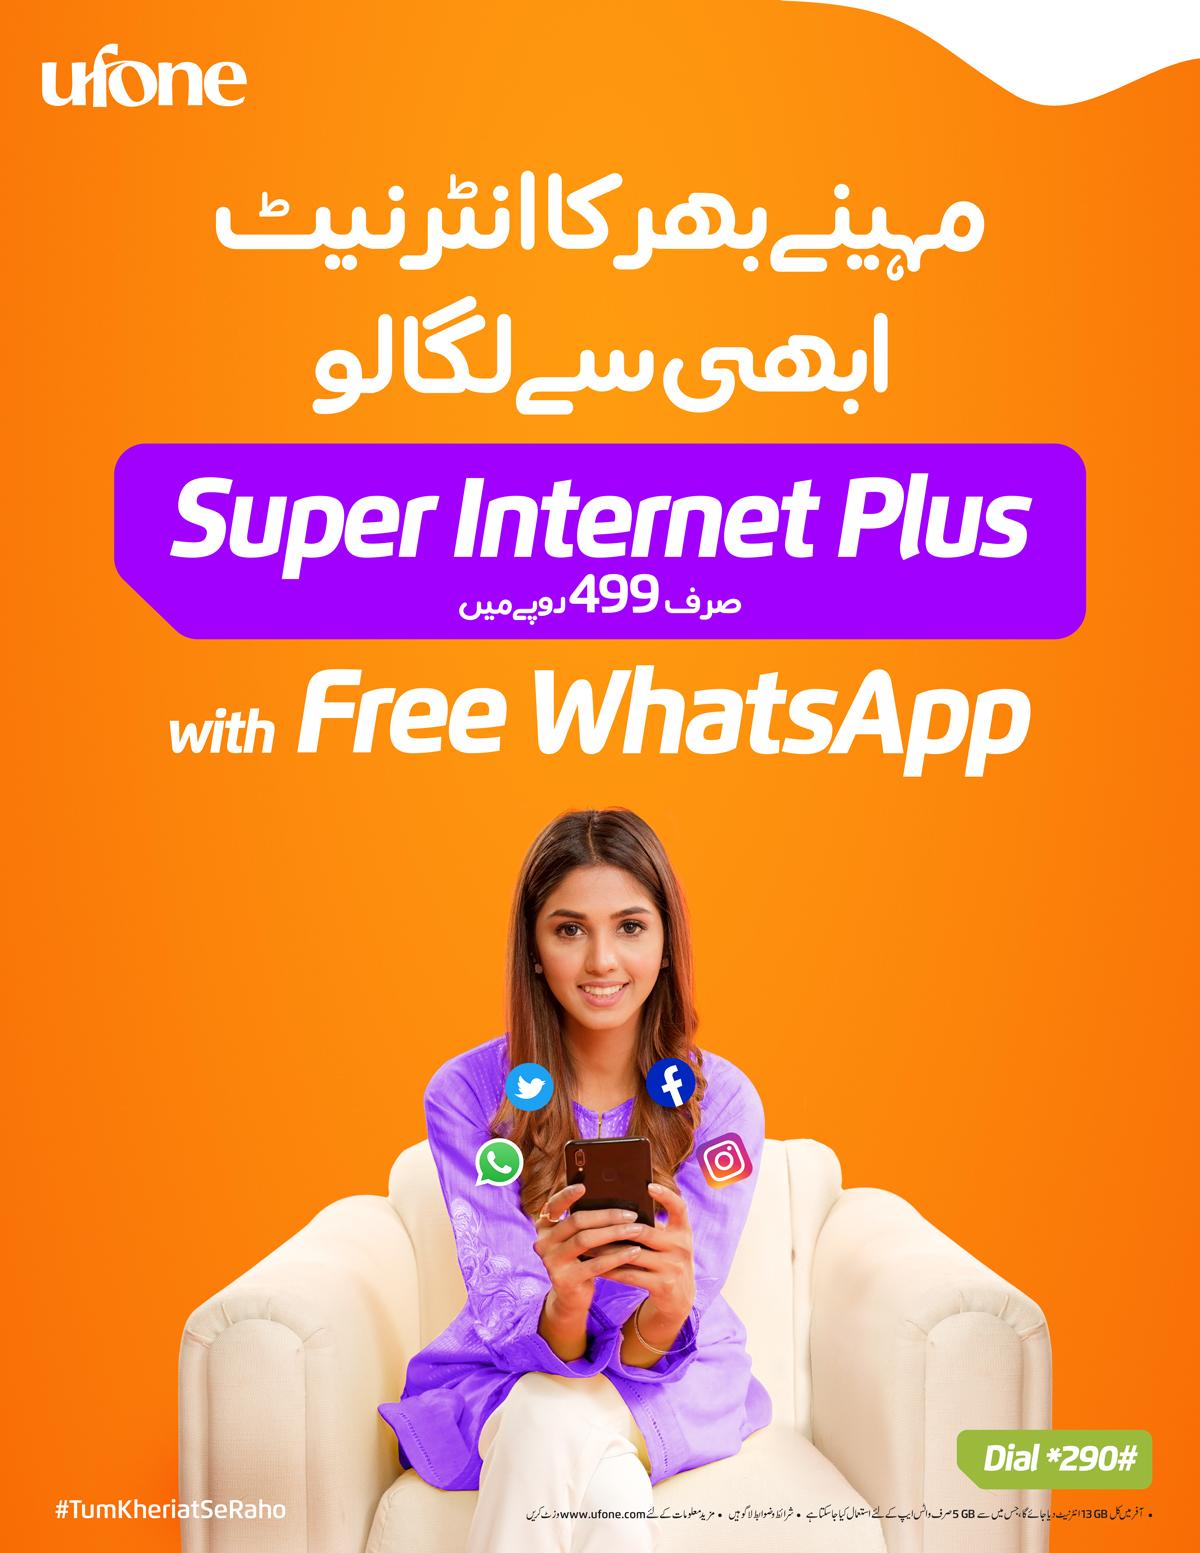 Ufone Monthly Data Offer to ensure seamless communication while Pakistanis stay at home